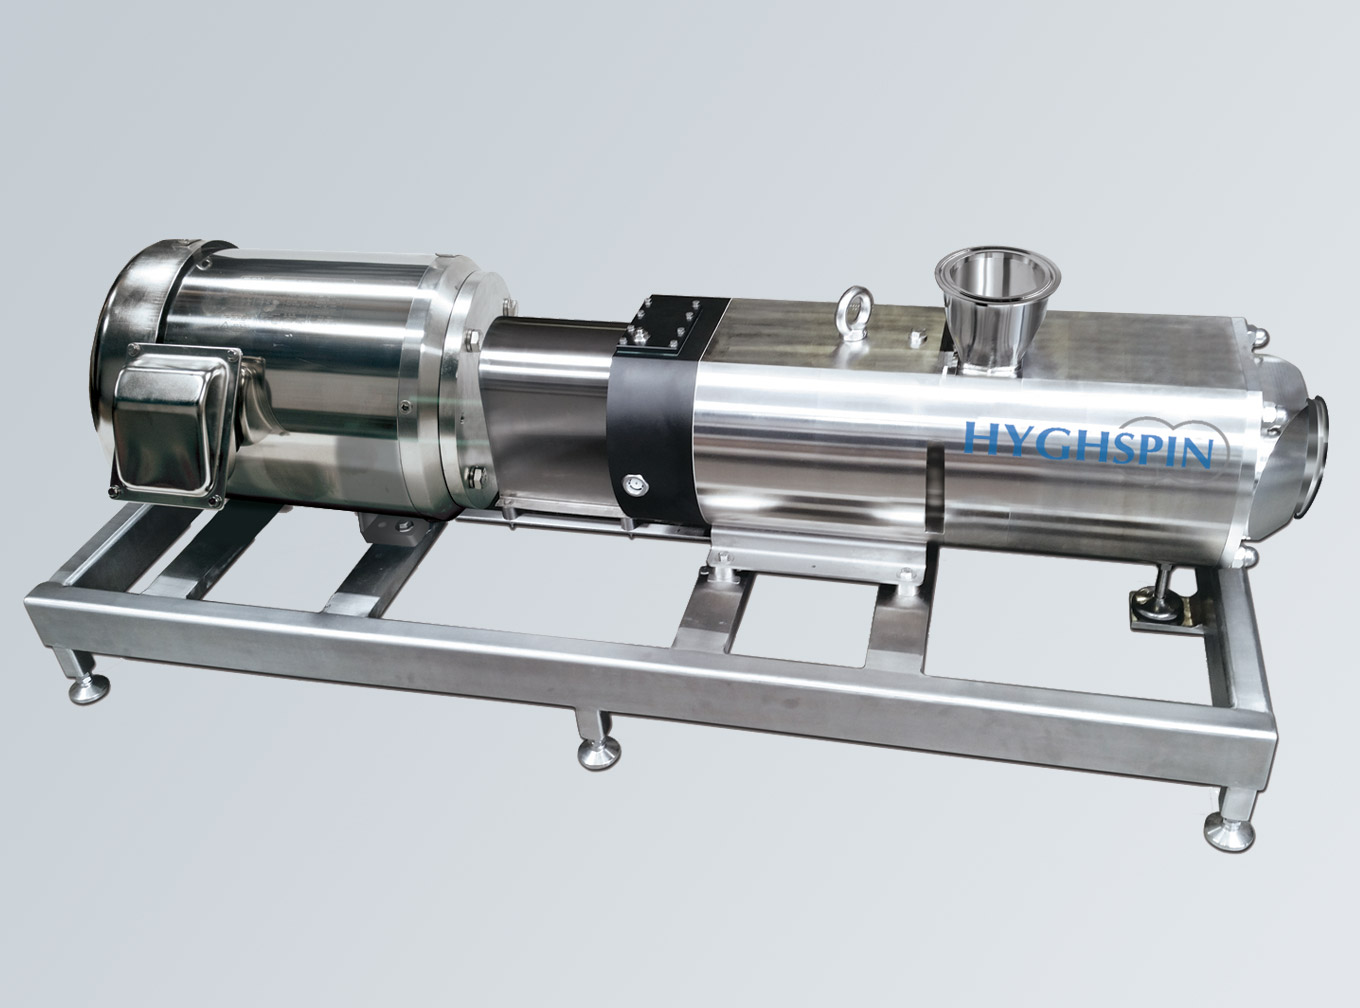 HYGHSPIN Extended on a stainless steel frame with hygienic stainless steel motor